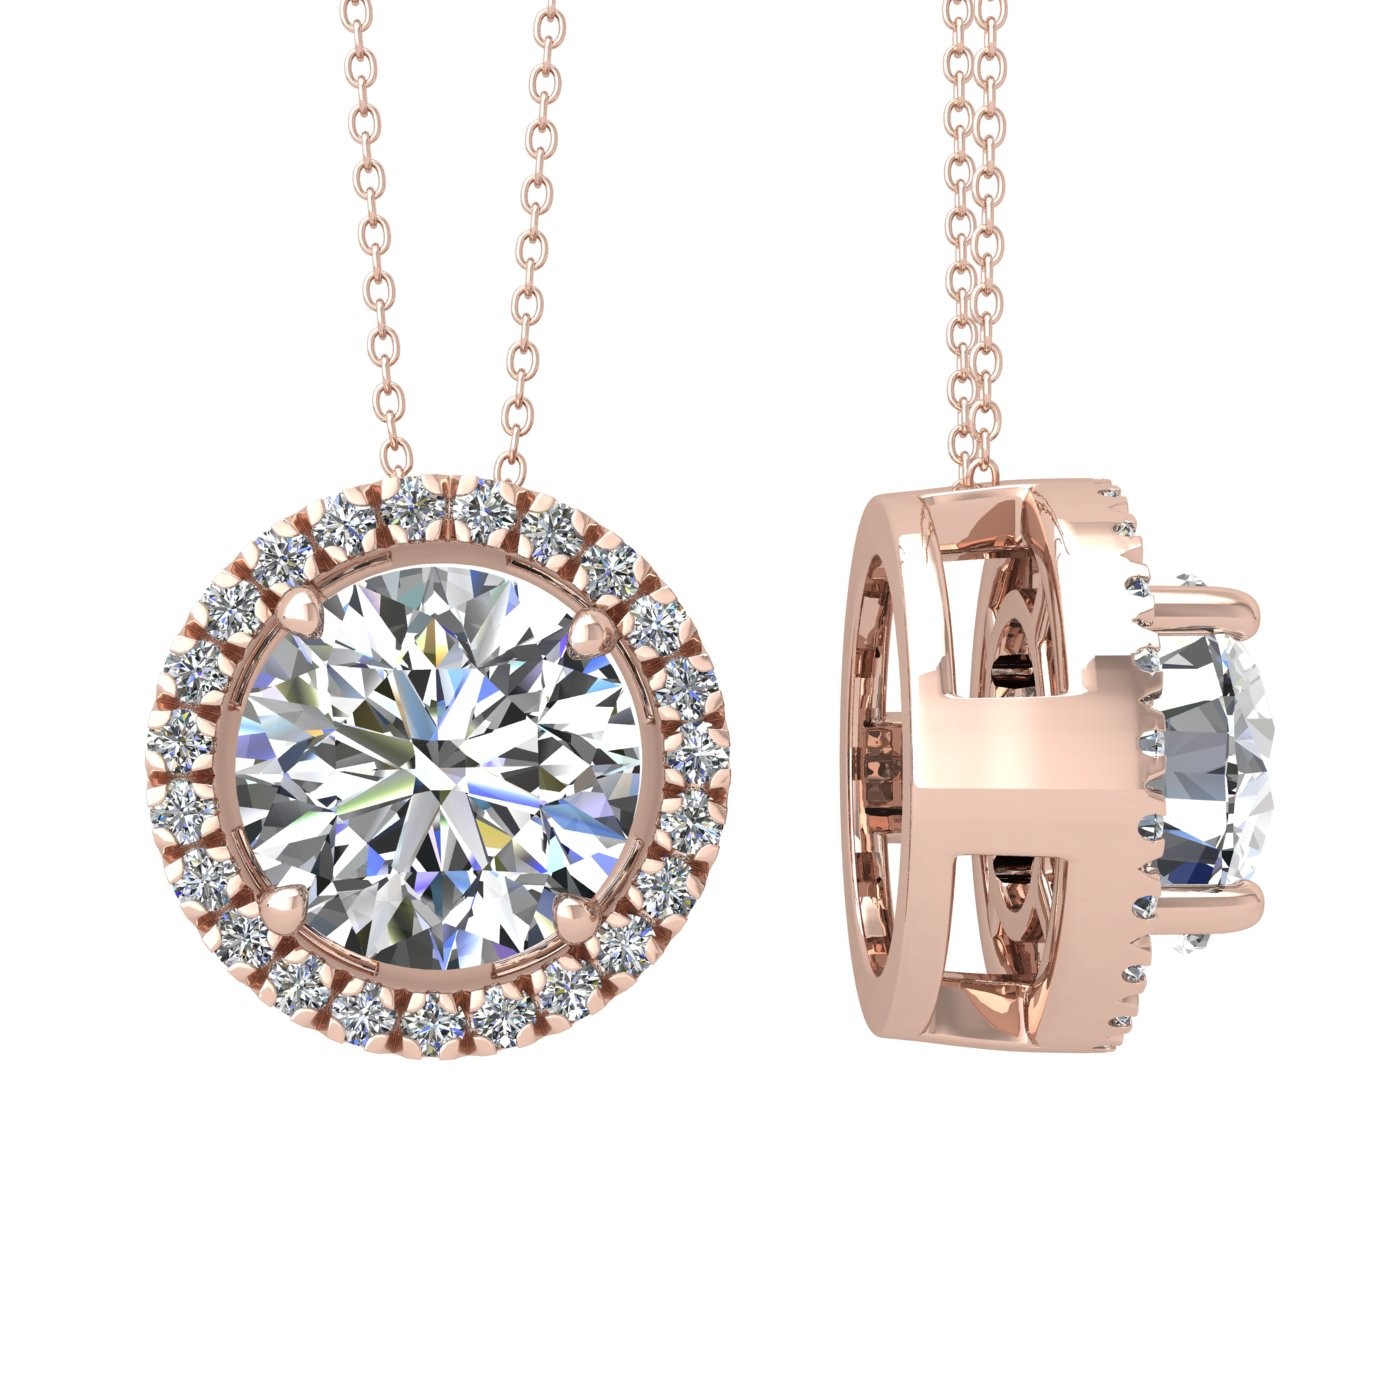 18k rose gold  1,2 ct 4 prong round shape diamond pendant with diamond pavÉ set halo including chain seperate from the pendant